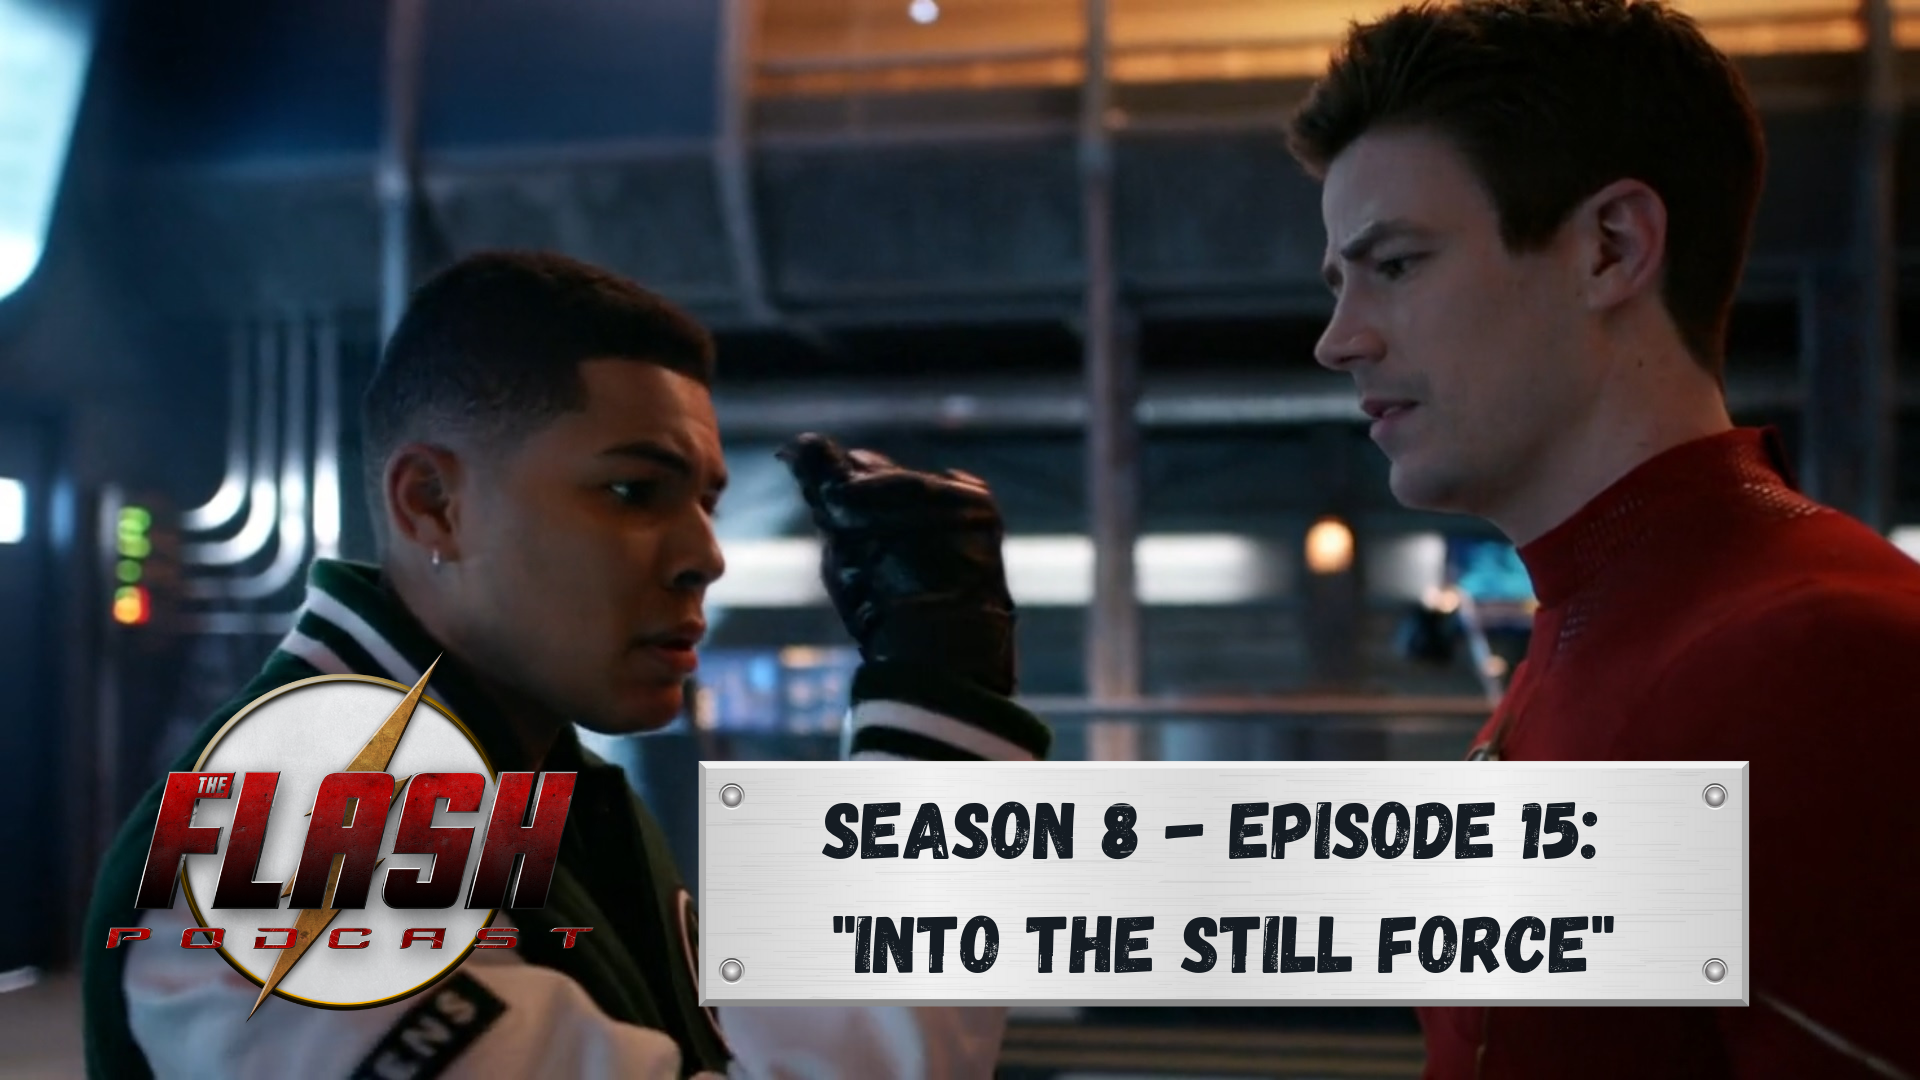 The Flash Podcast Season 8 - Episode 15 Into the Still Force